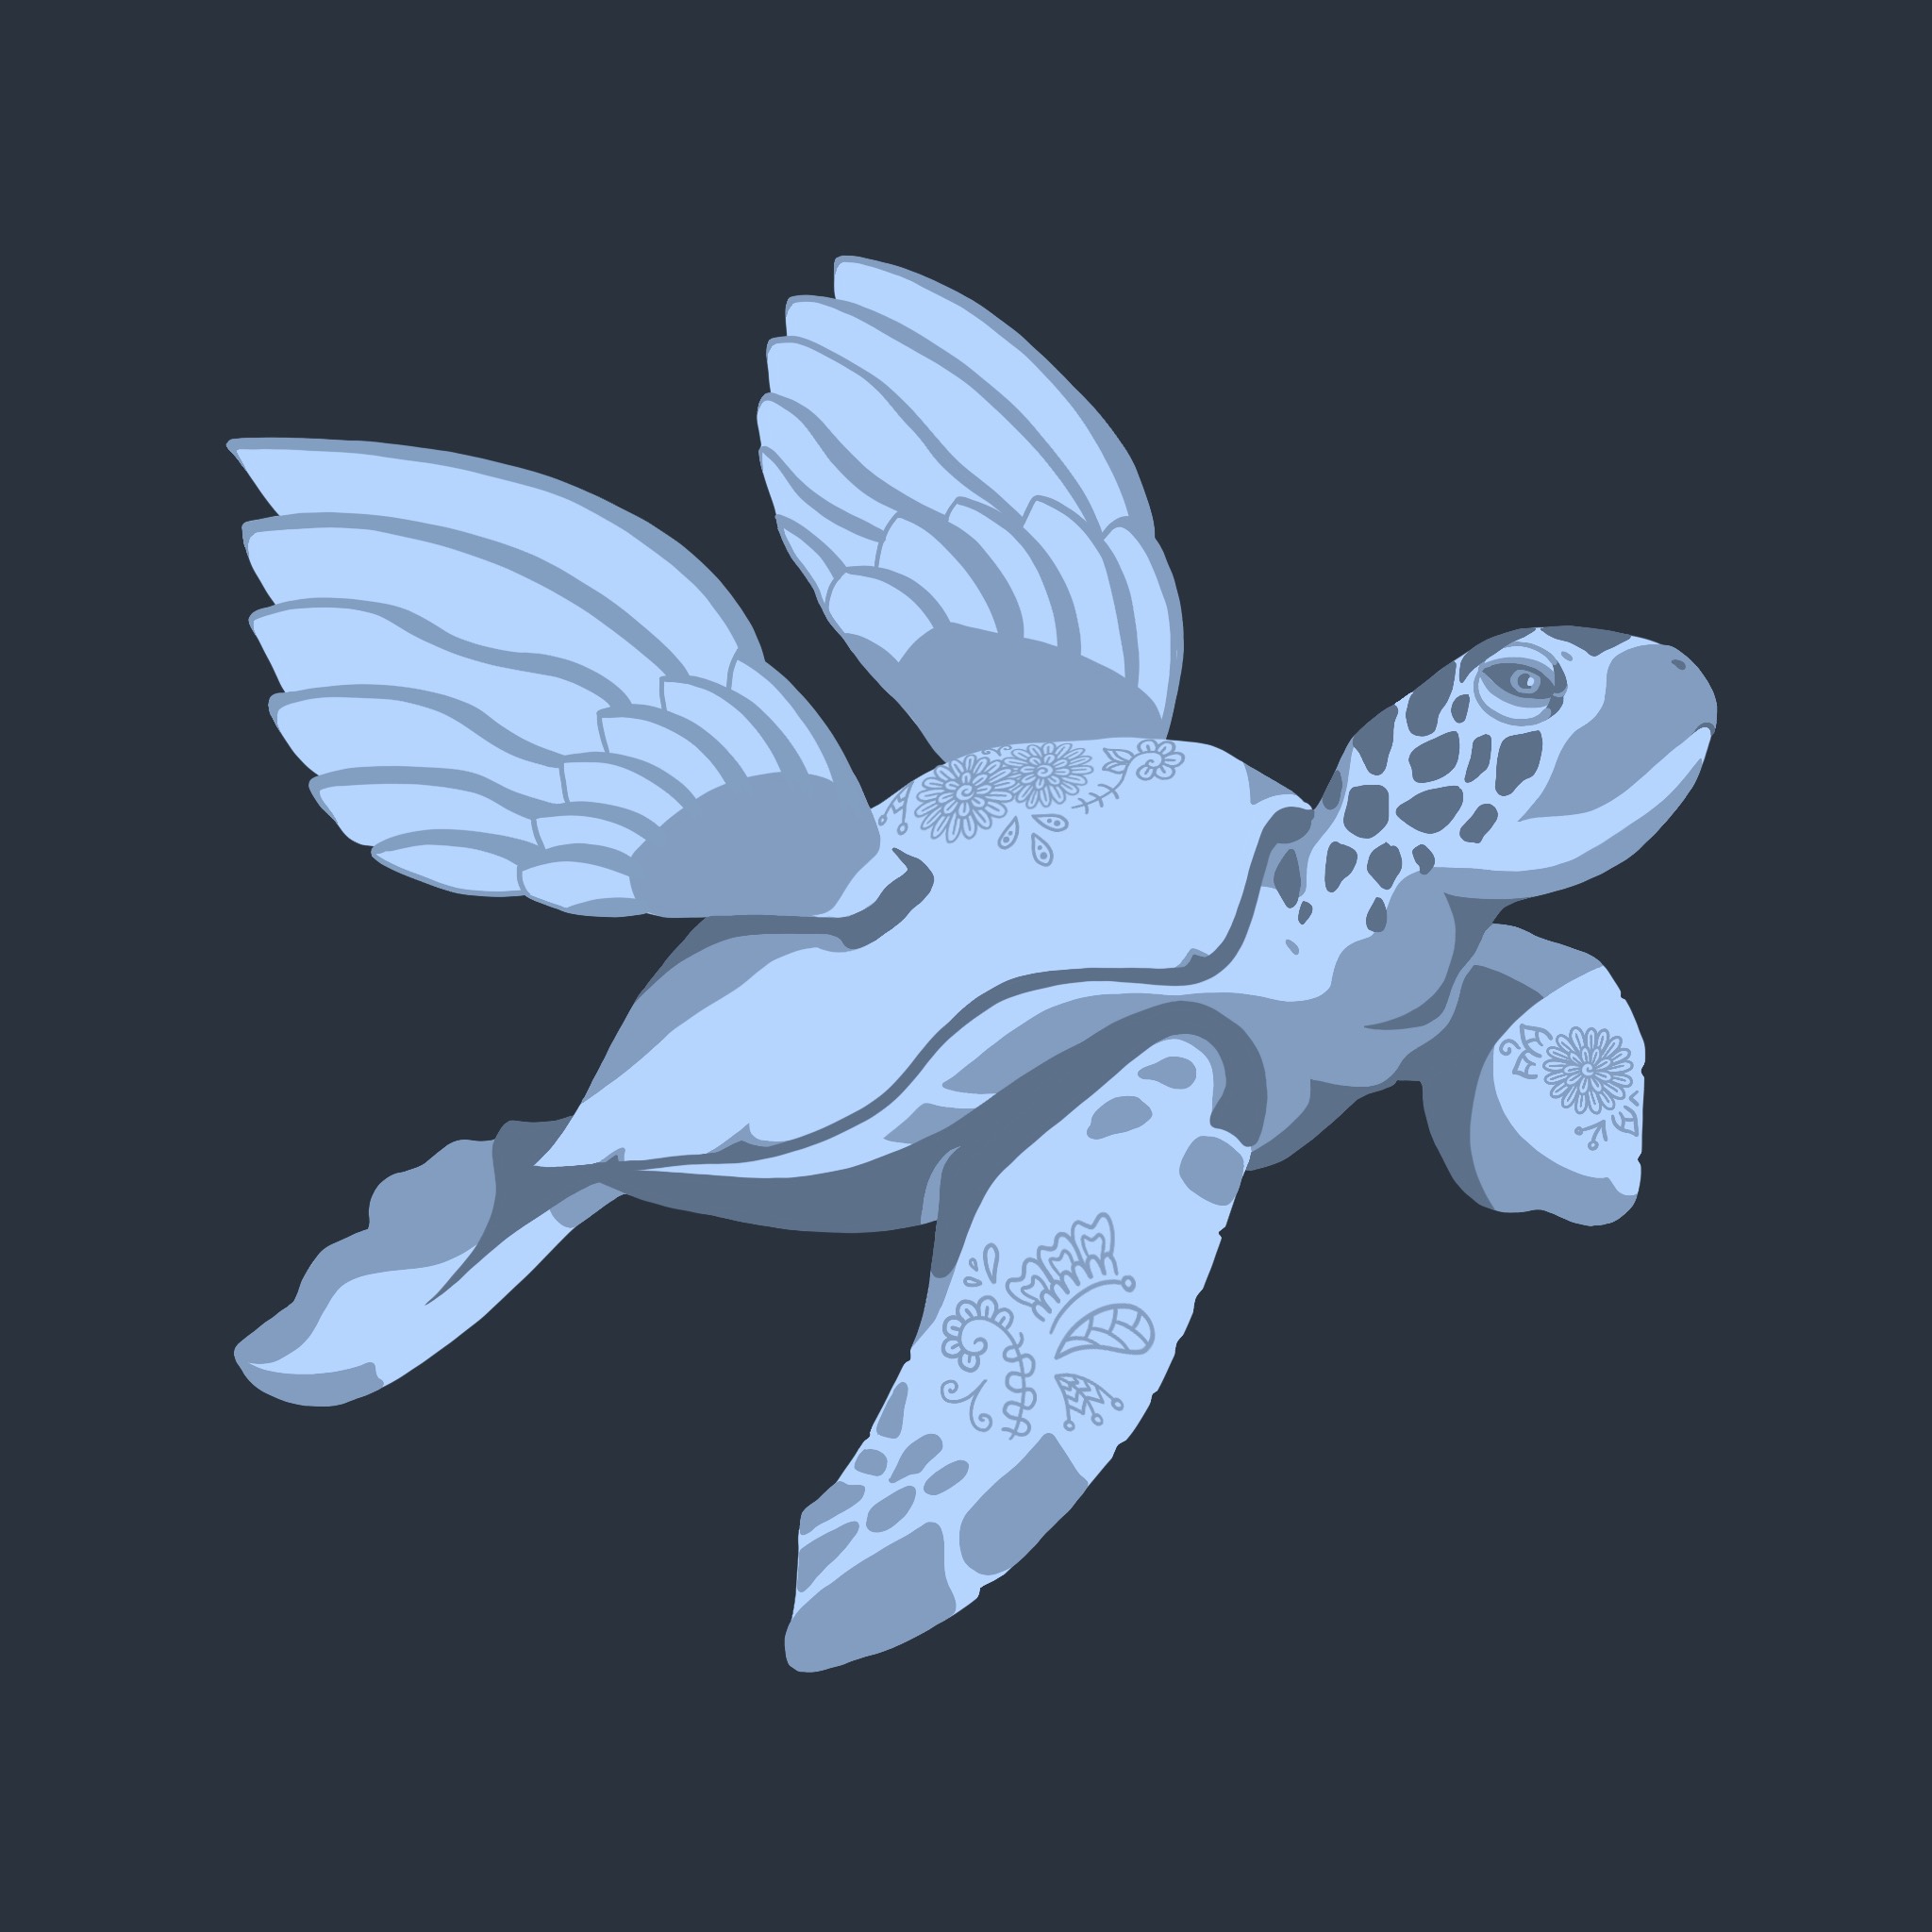 Digital illustration of a floating sea turtle with wings in a monochromatic blue color scheme